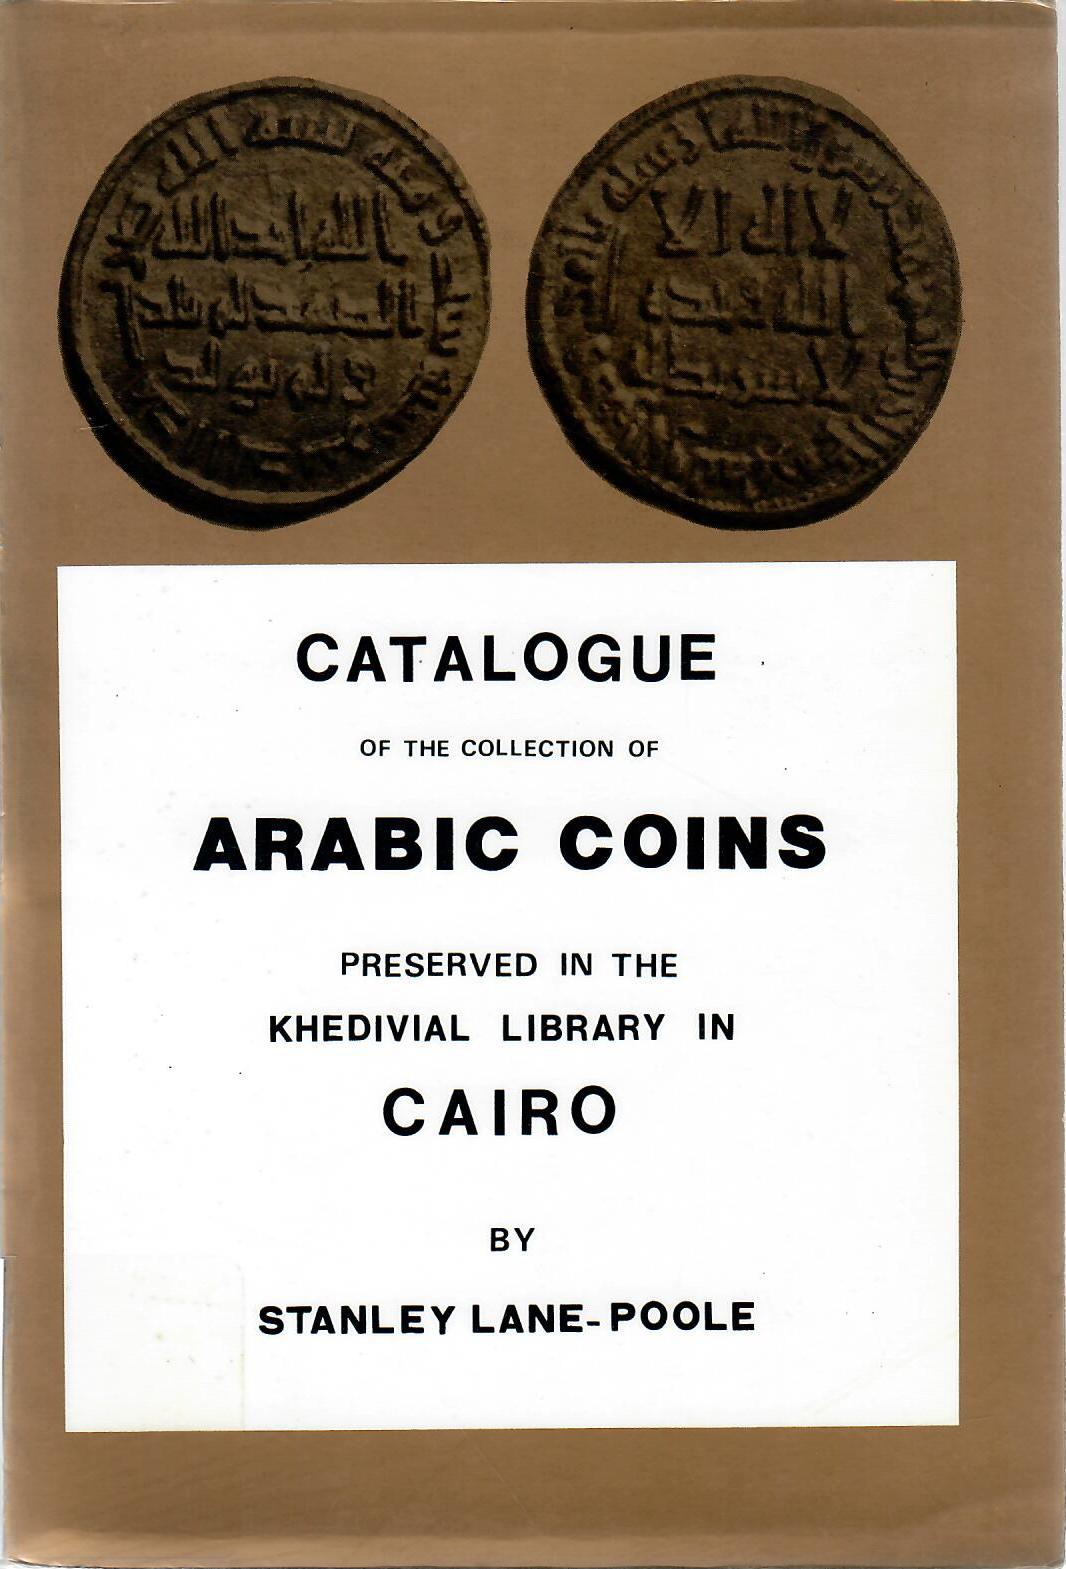 CATALOGUE OF THE COLLECTION OF ARABIC COINS